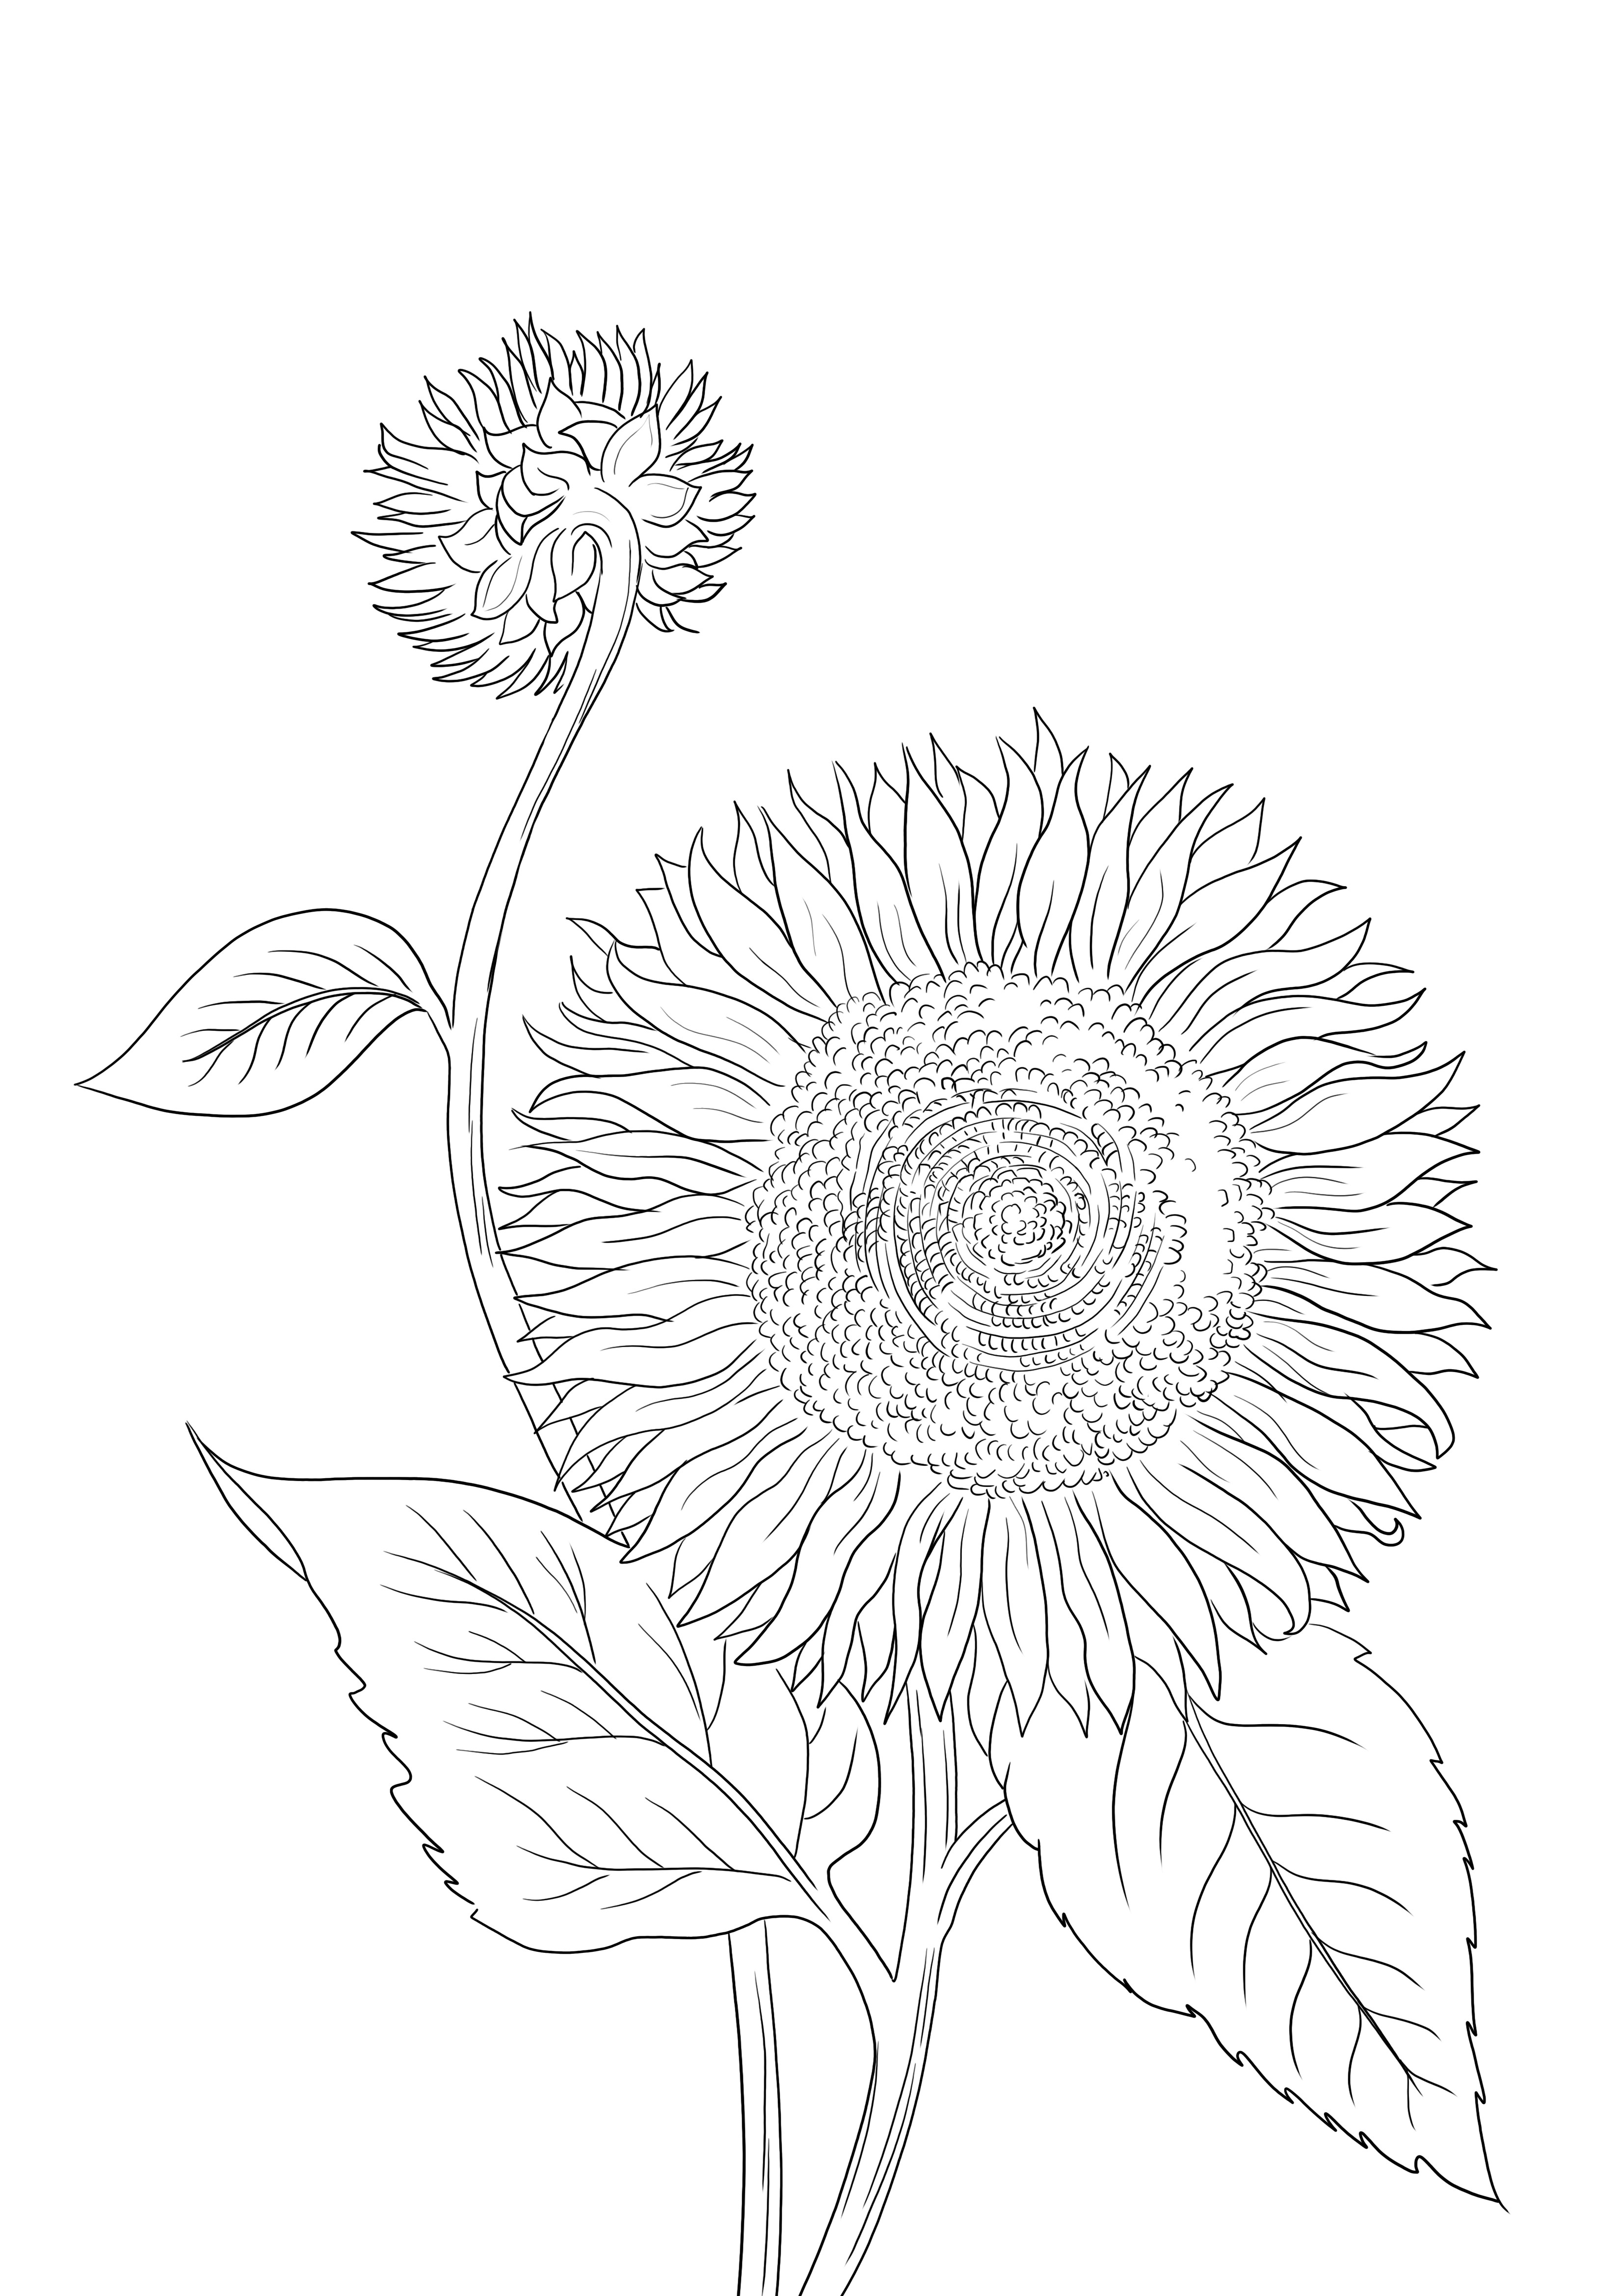 Blooming Sunflower is ready to be printed or downloaded and colored